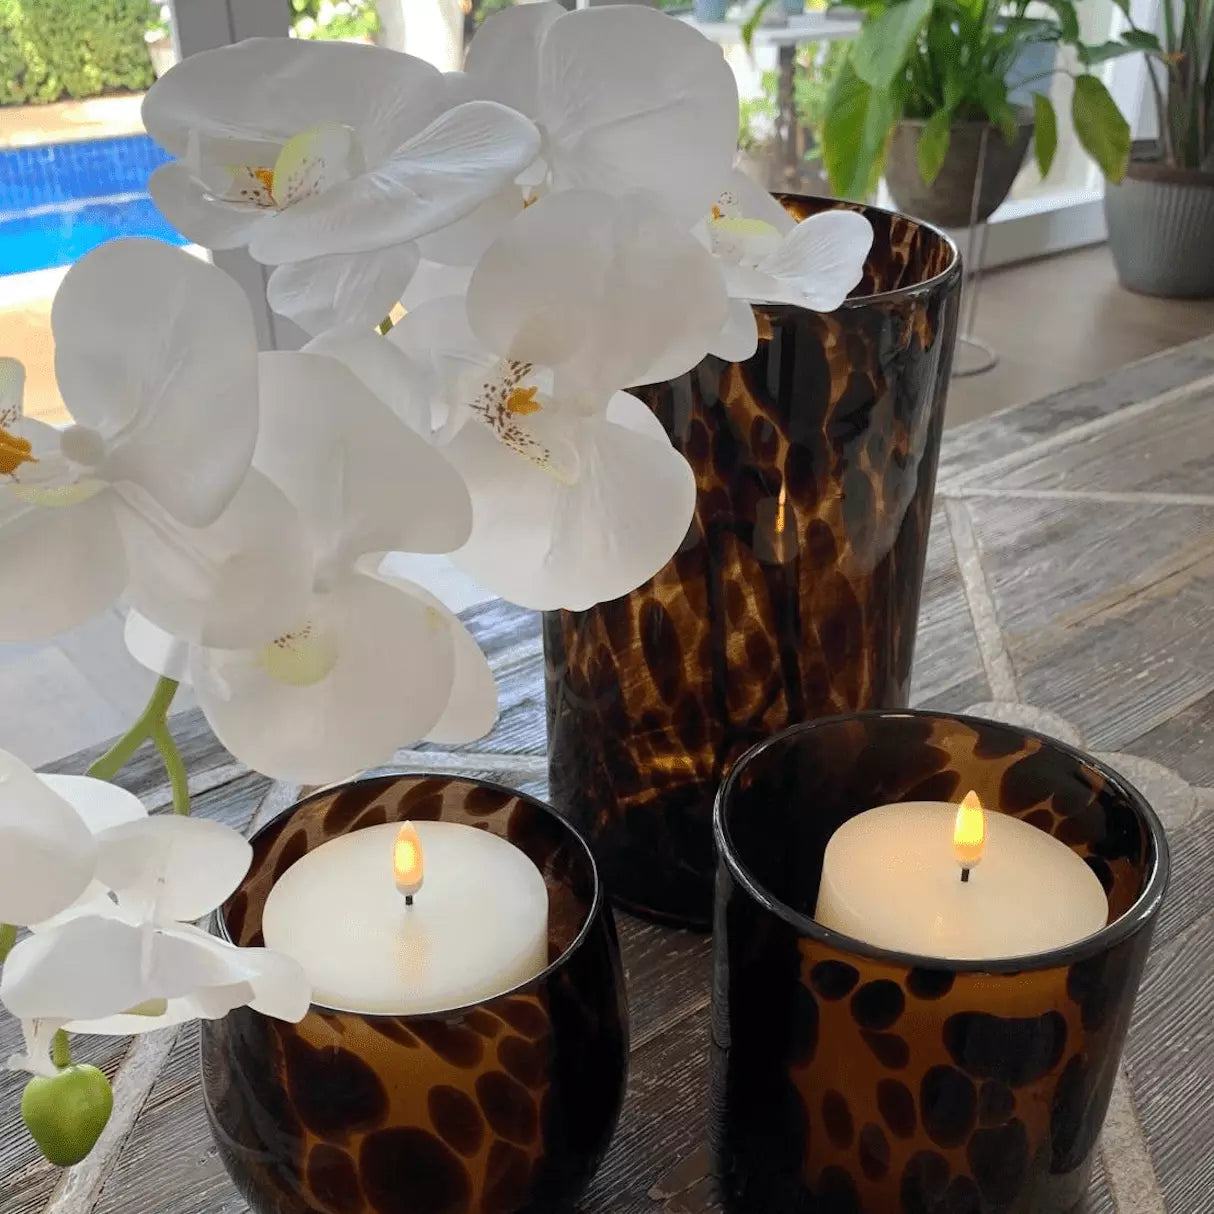 Three Tortoiseshell Vase - Large with candles and orchids on a table from Mediterranean Markets.